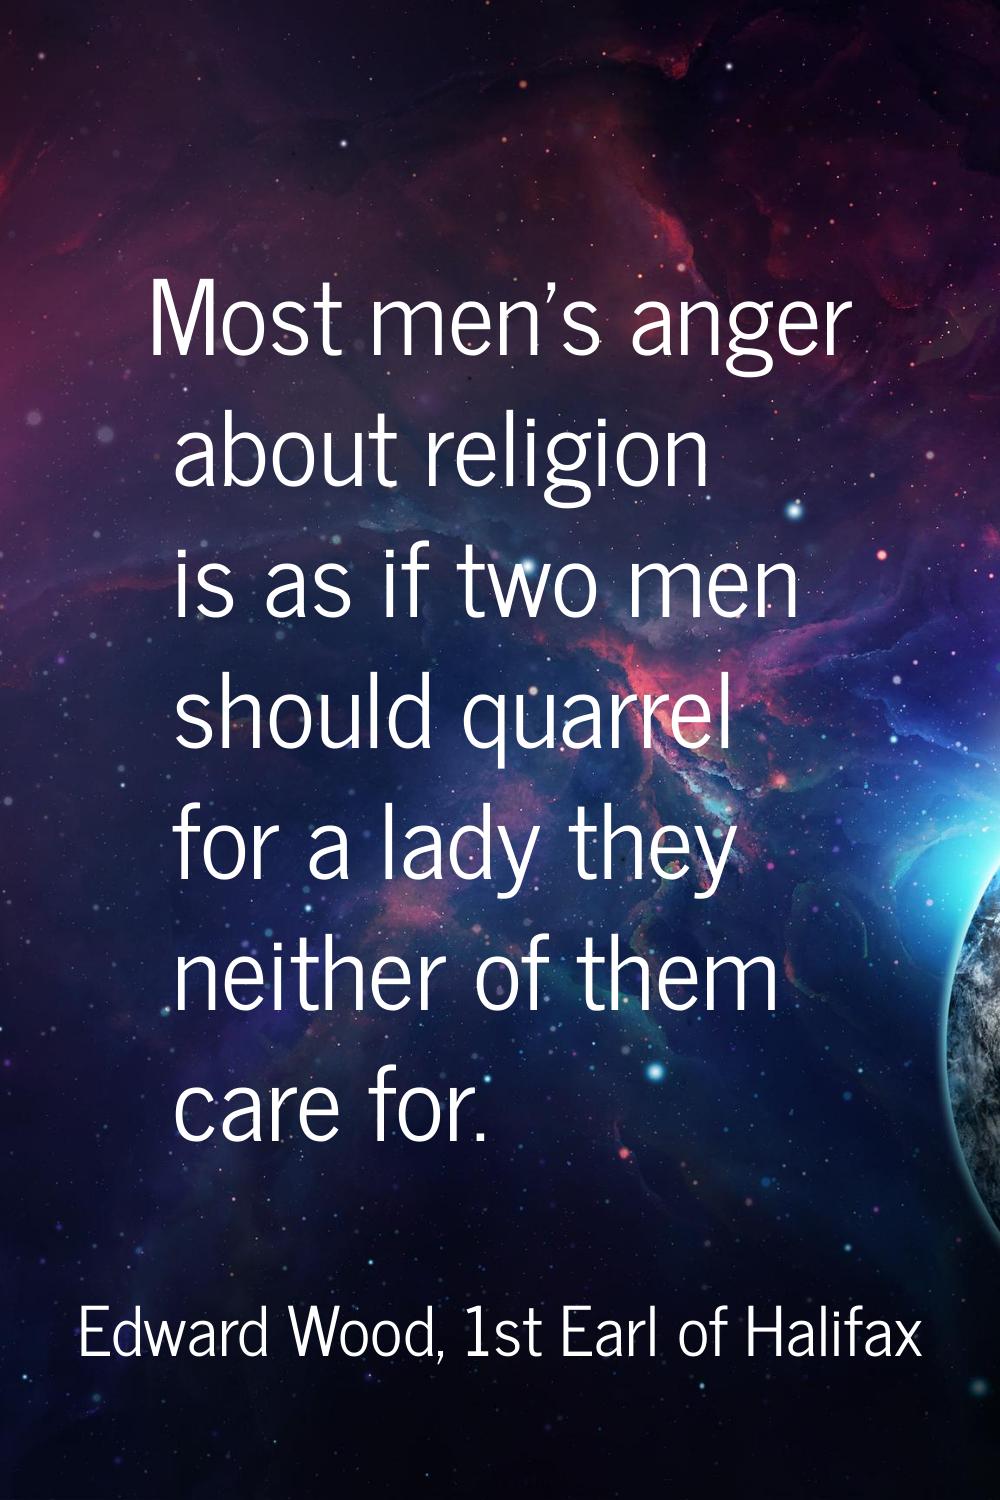 Most men's anger about religion is as if two men should quarrel for a lady they neither of them car